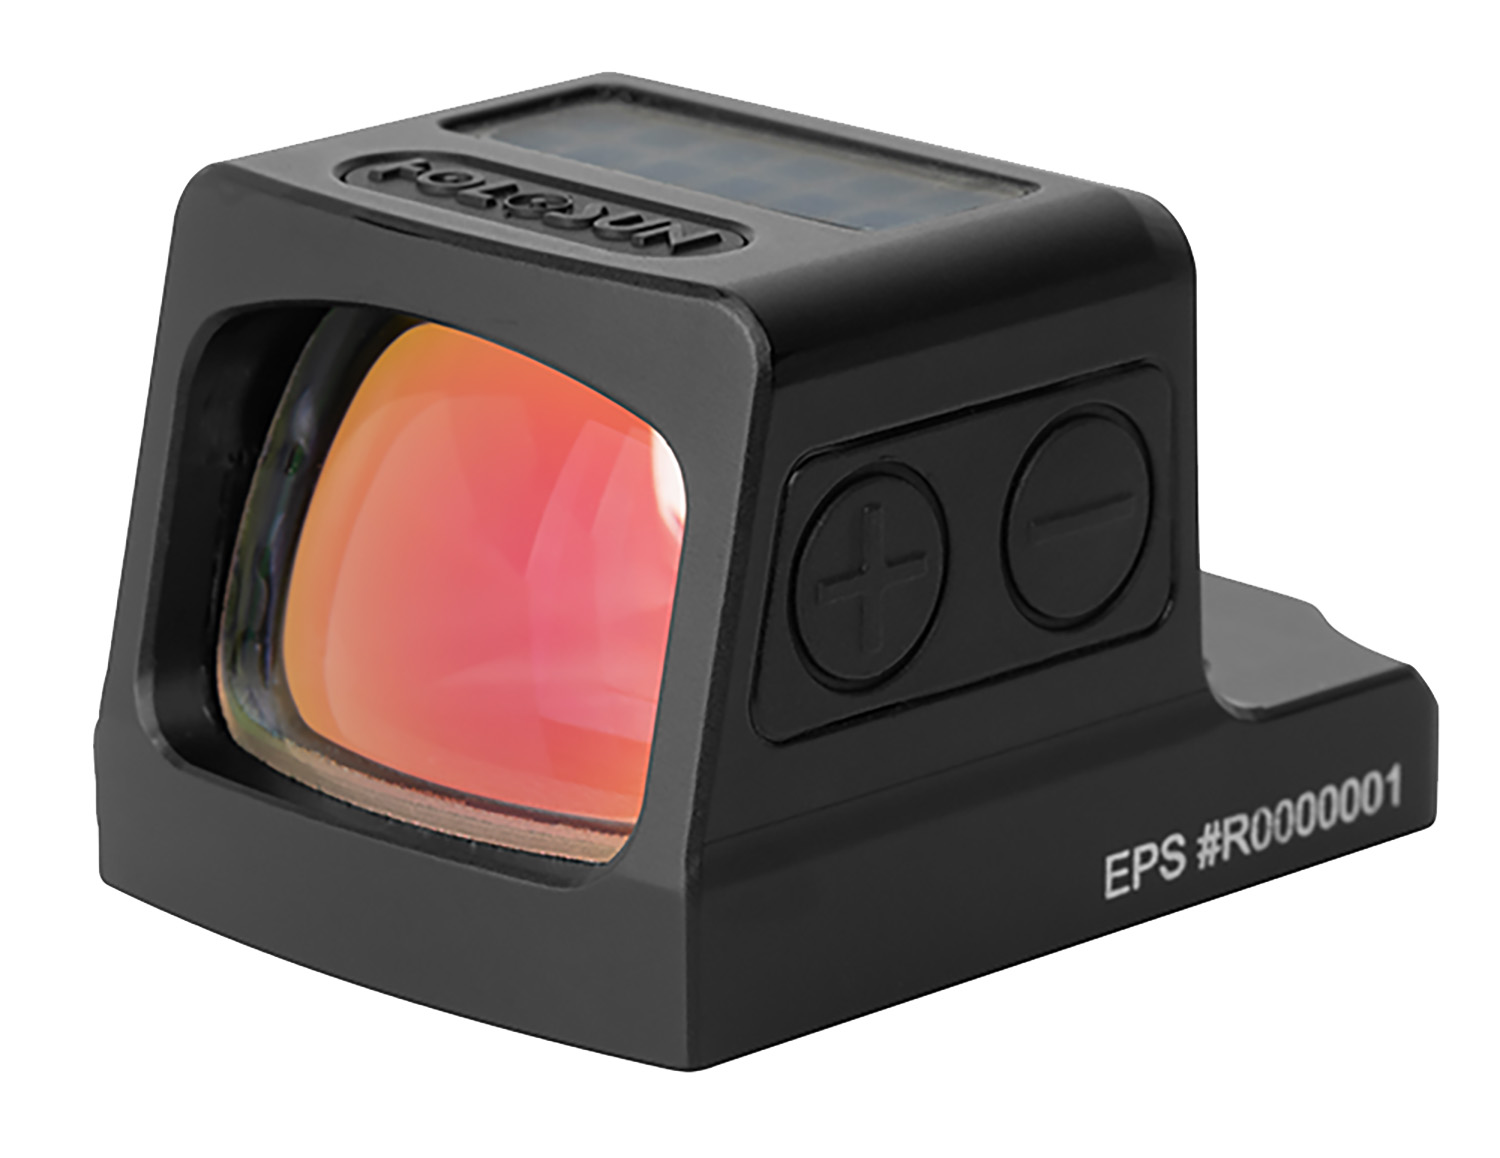 Holosun EPSRDMRS EPS Red MRS  Black Anodized 0.63 x 0.91 2 MOA Red Dot/32 MOA Red Circle Multi Reticle